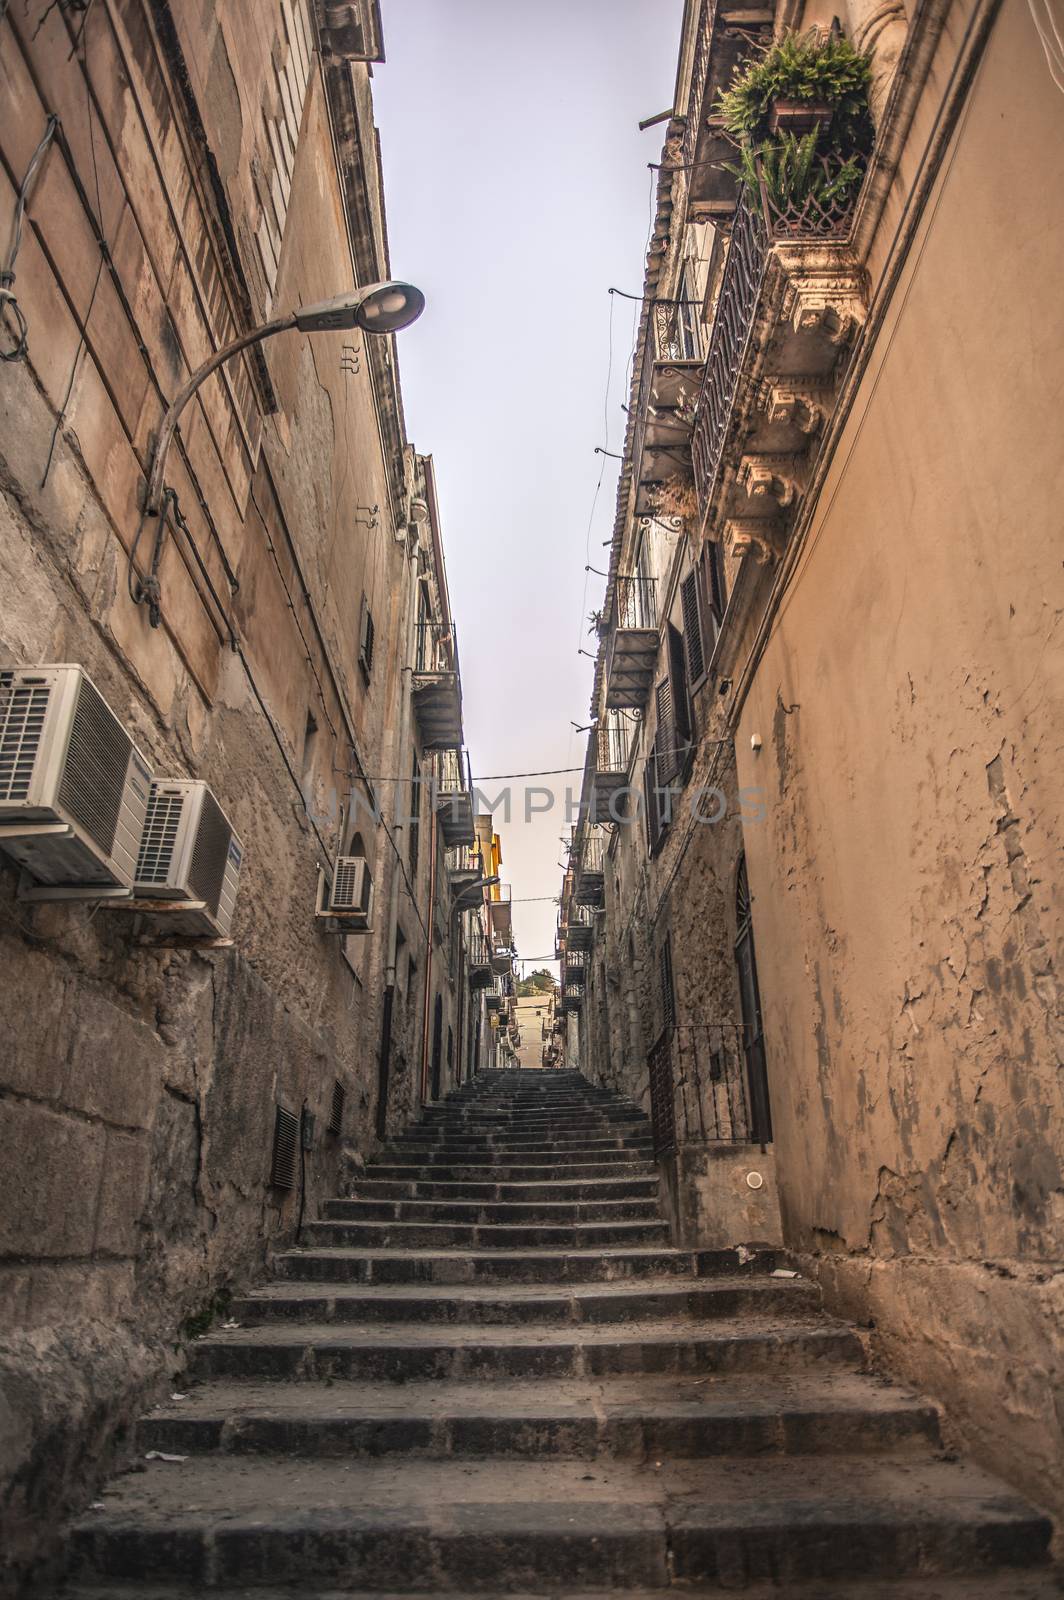 Characteristic Alleyway belonging to the city of Licata in Sicily